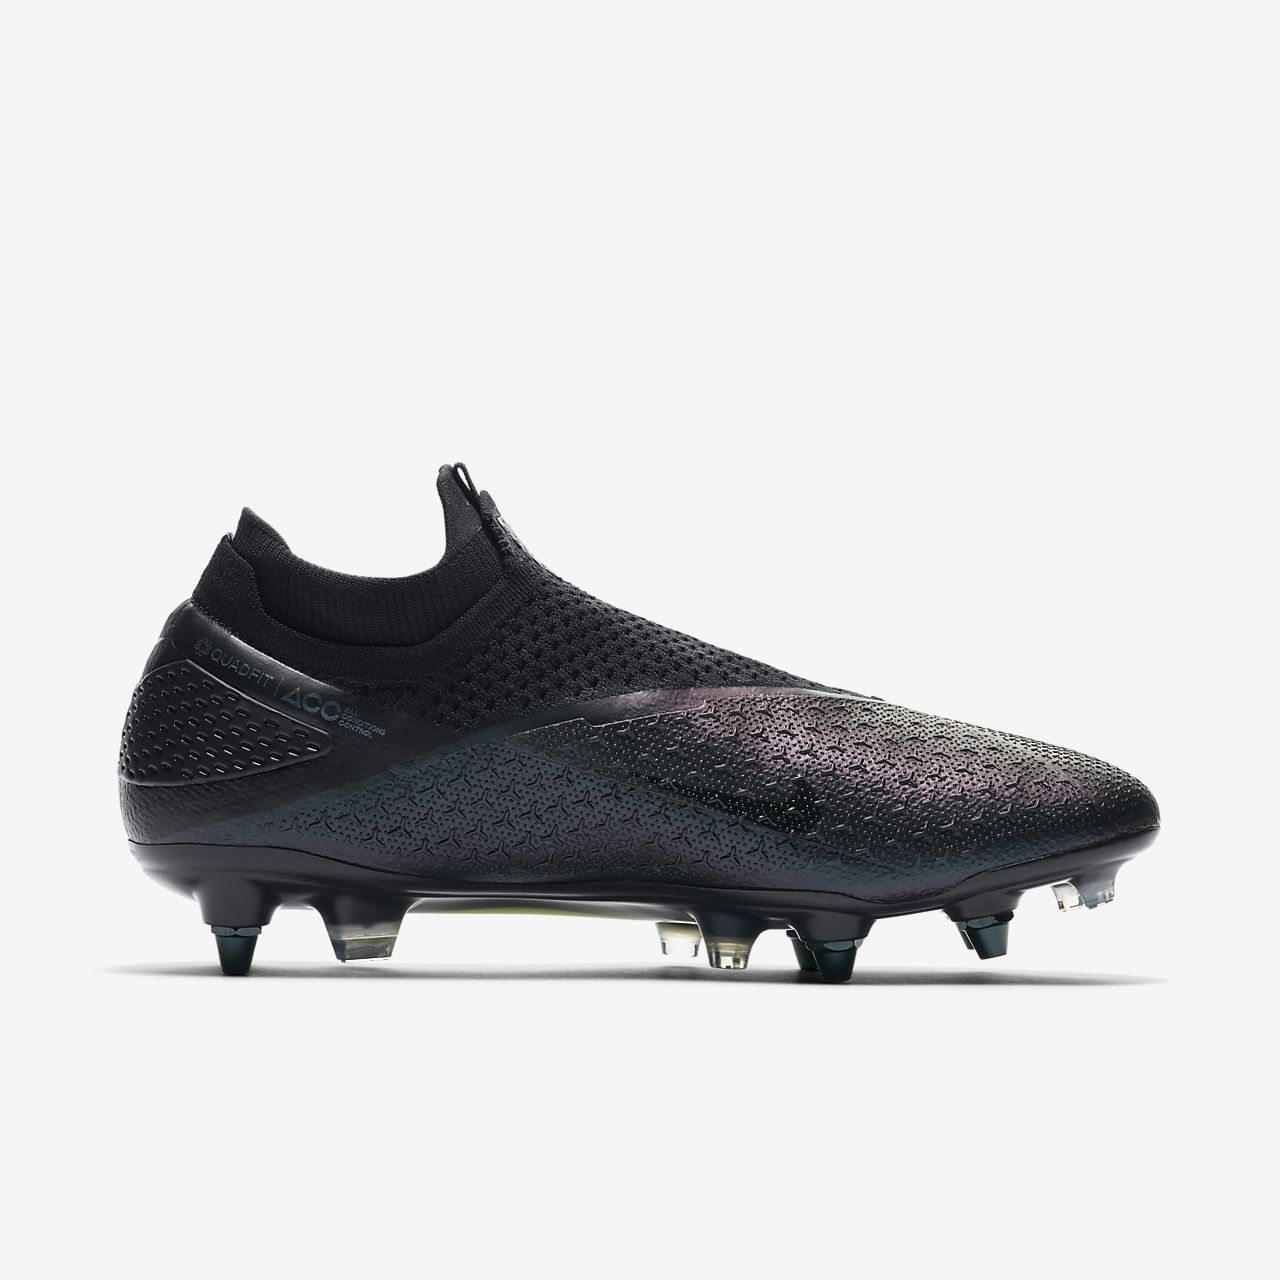 Nike Jr. Phantom Vision 2 Academy Dynamic Fit IC Younger .